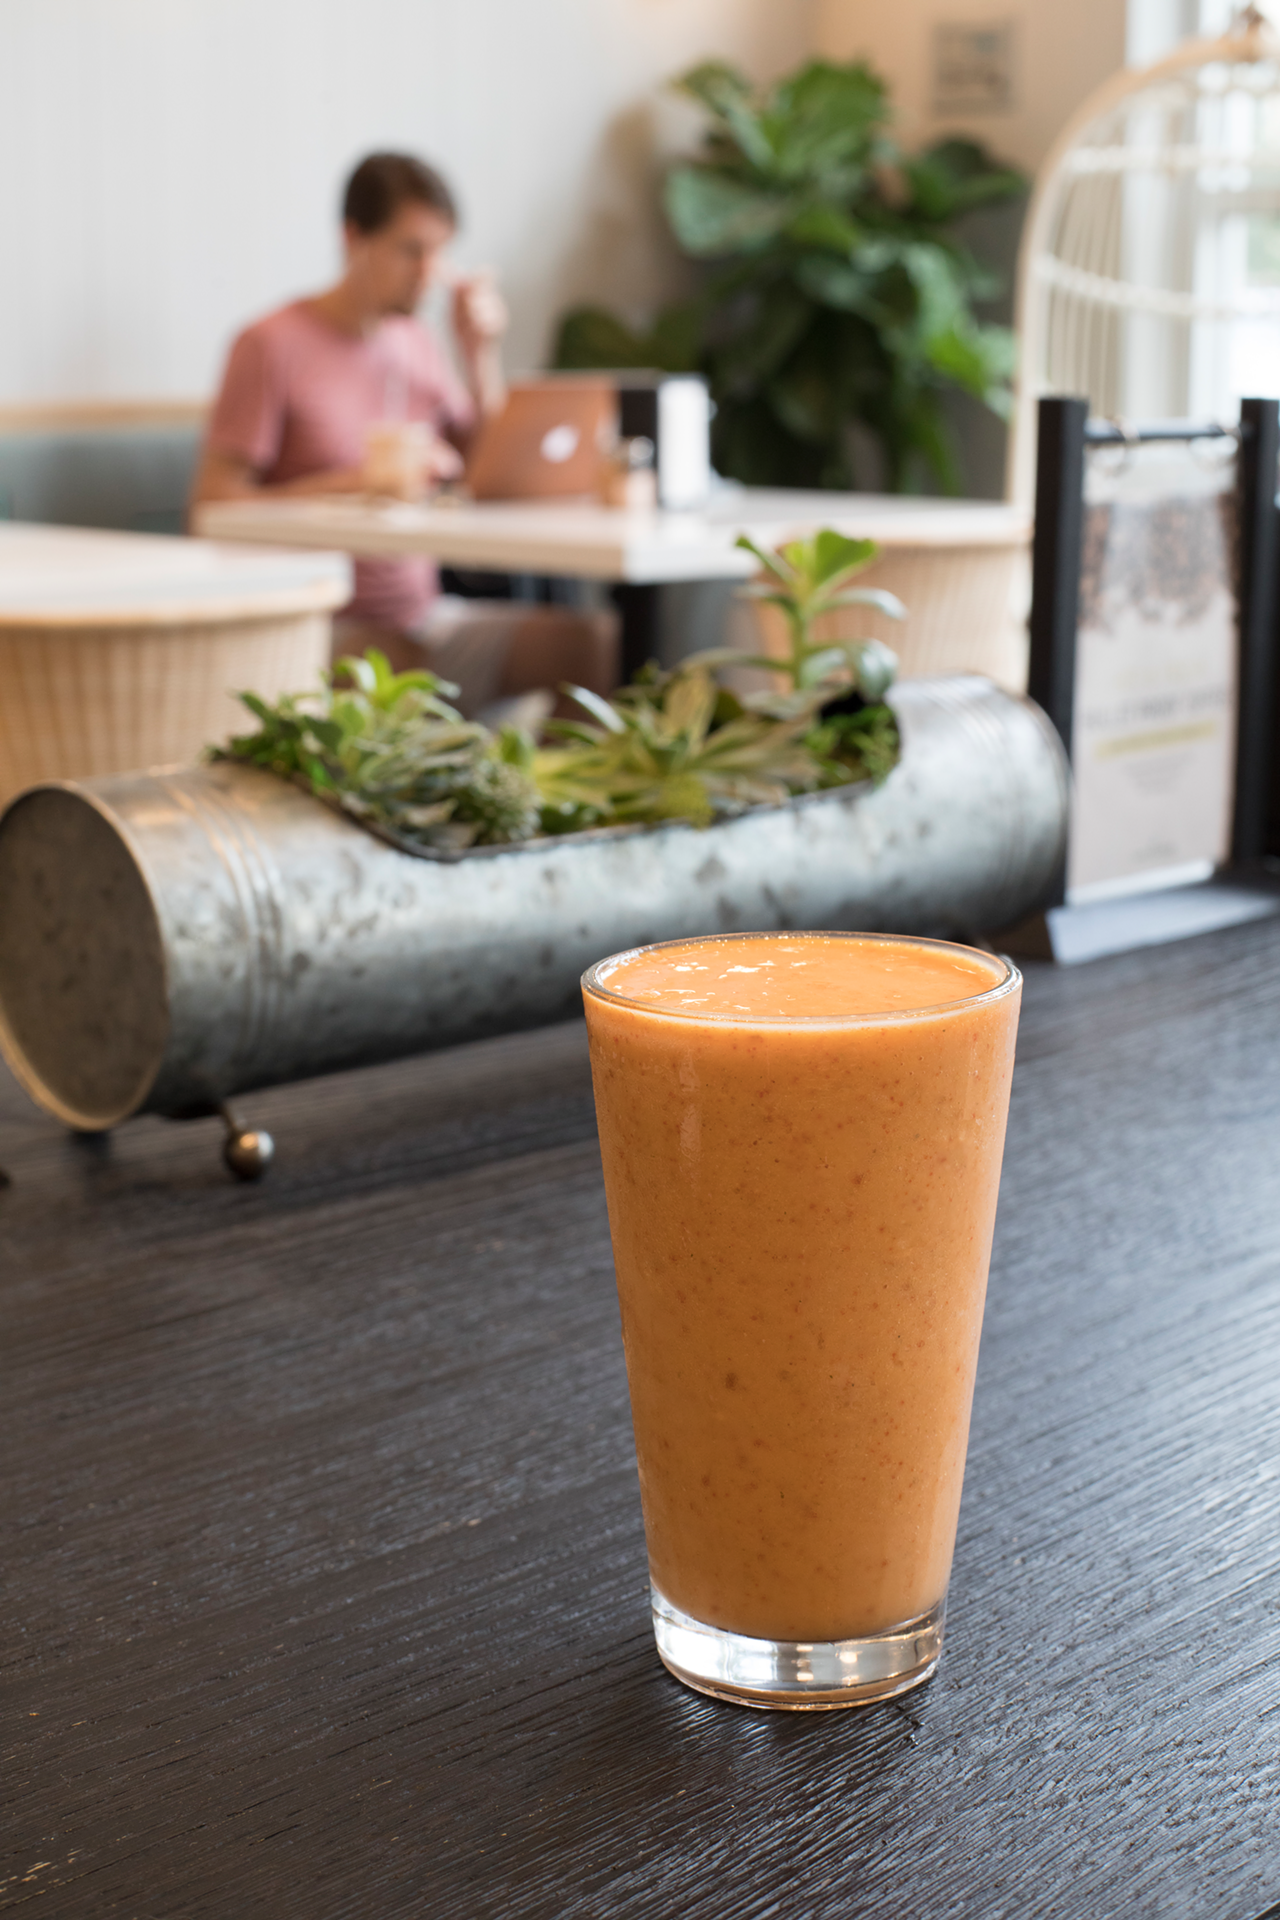 The Orange Screamsicle smoothie has a thick, creamy texture and a pleasant, fruity taste belying its healthful origins.